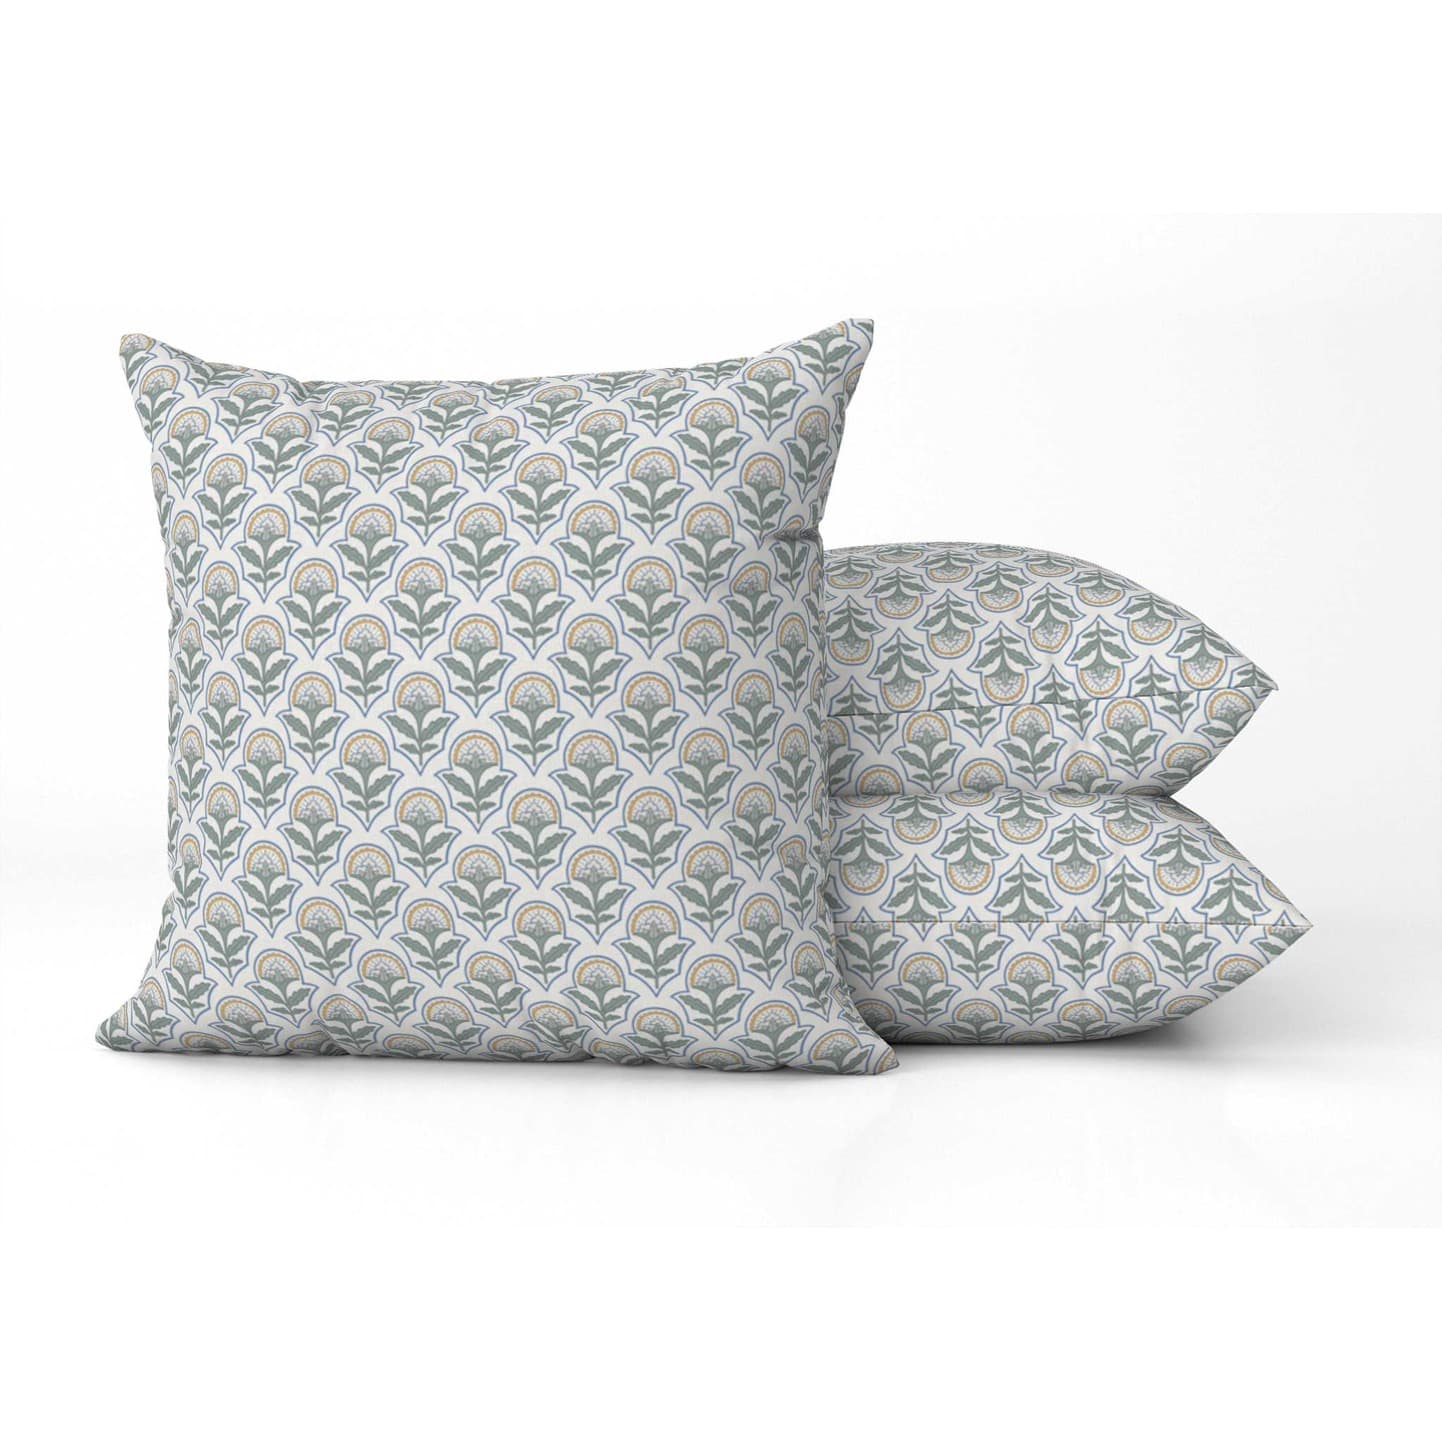 Charlotte Square Pillow in Sage Water